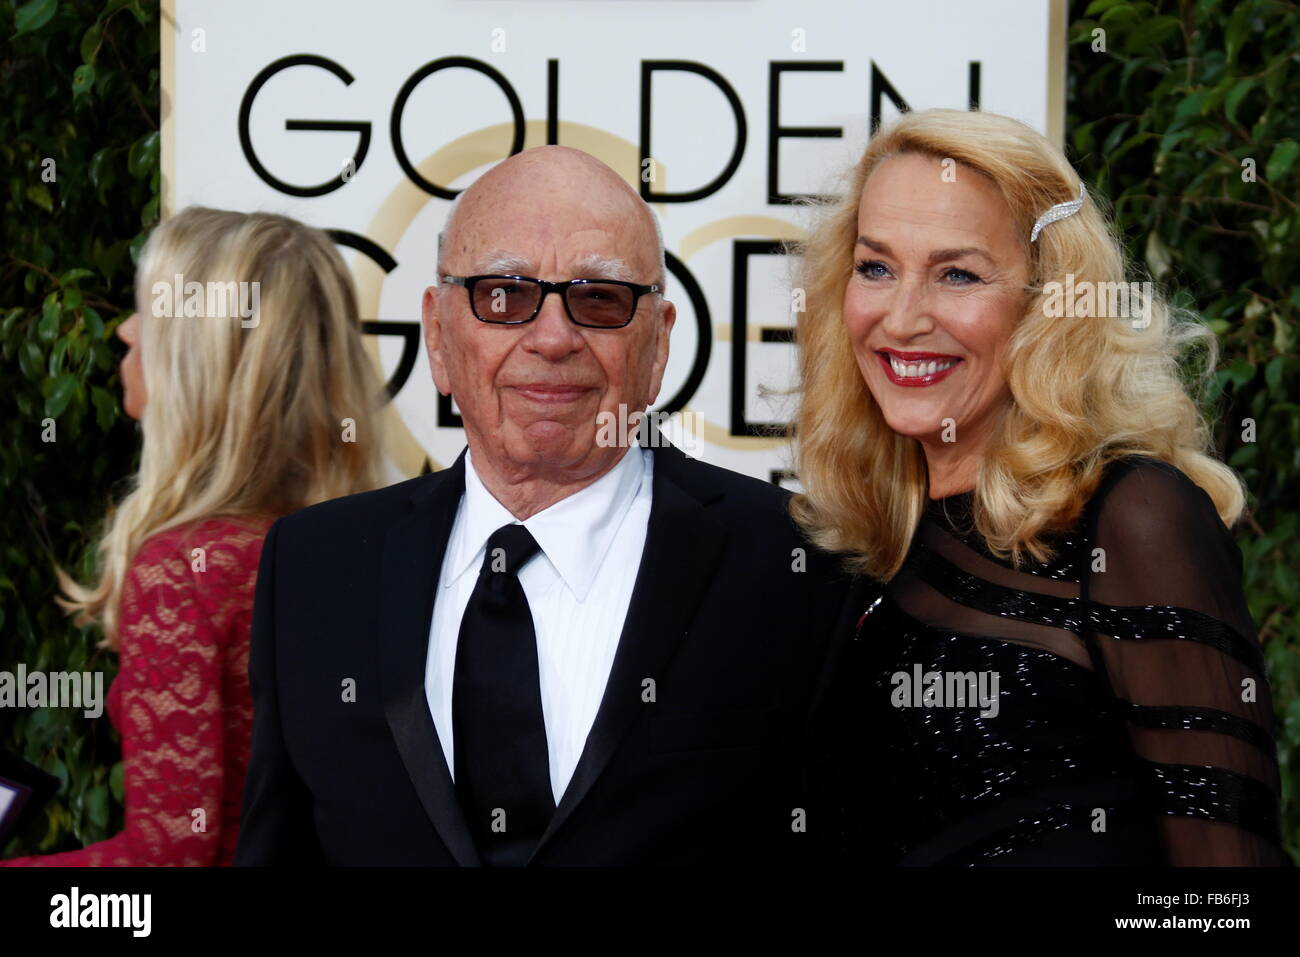 Beverly Hills, California, USA. 10th Jan, 2016. Rupert Murdoch and Jerry Hall arrive for the 73rd Annual Golden Globe Awards at the Beverly Hilton Hotel in Beverly Hills, California, USA, 10 January 2016. Photo: Hubert Boesl/dpa - NO WIRE SERVICE -/dpa/Alamy Live News Stock Photo